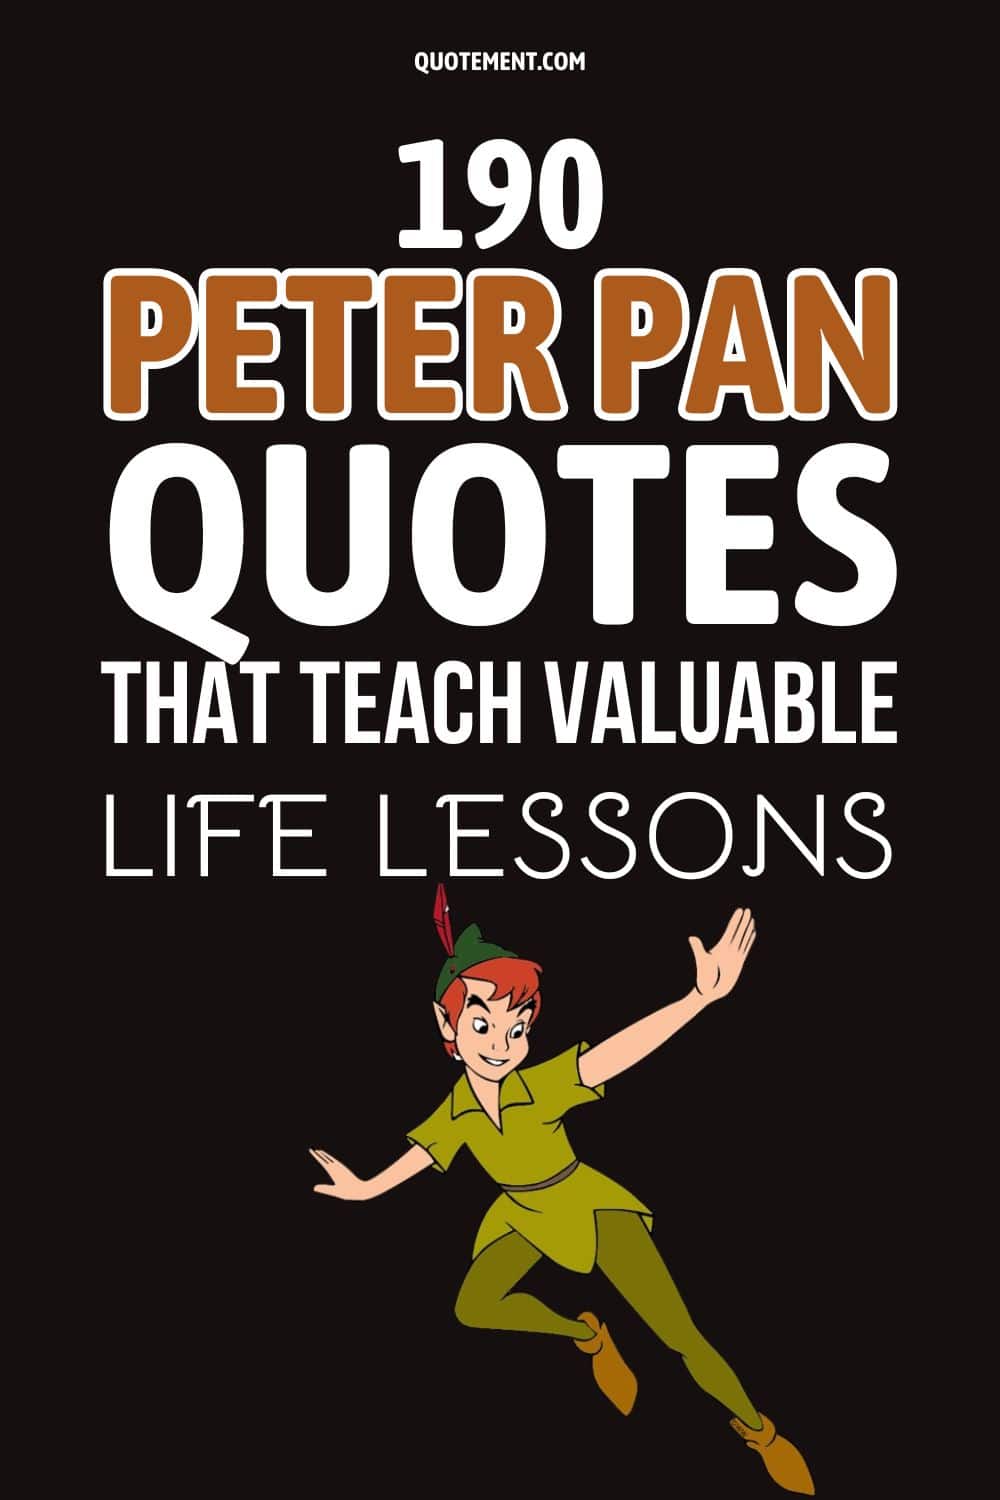 190 Peter Pan Quotes That Teach Valuable Life Lessons
